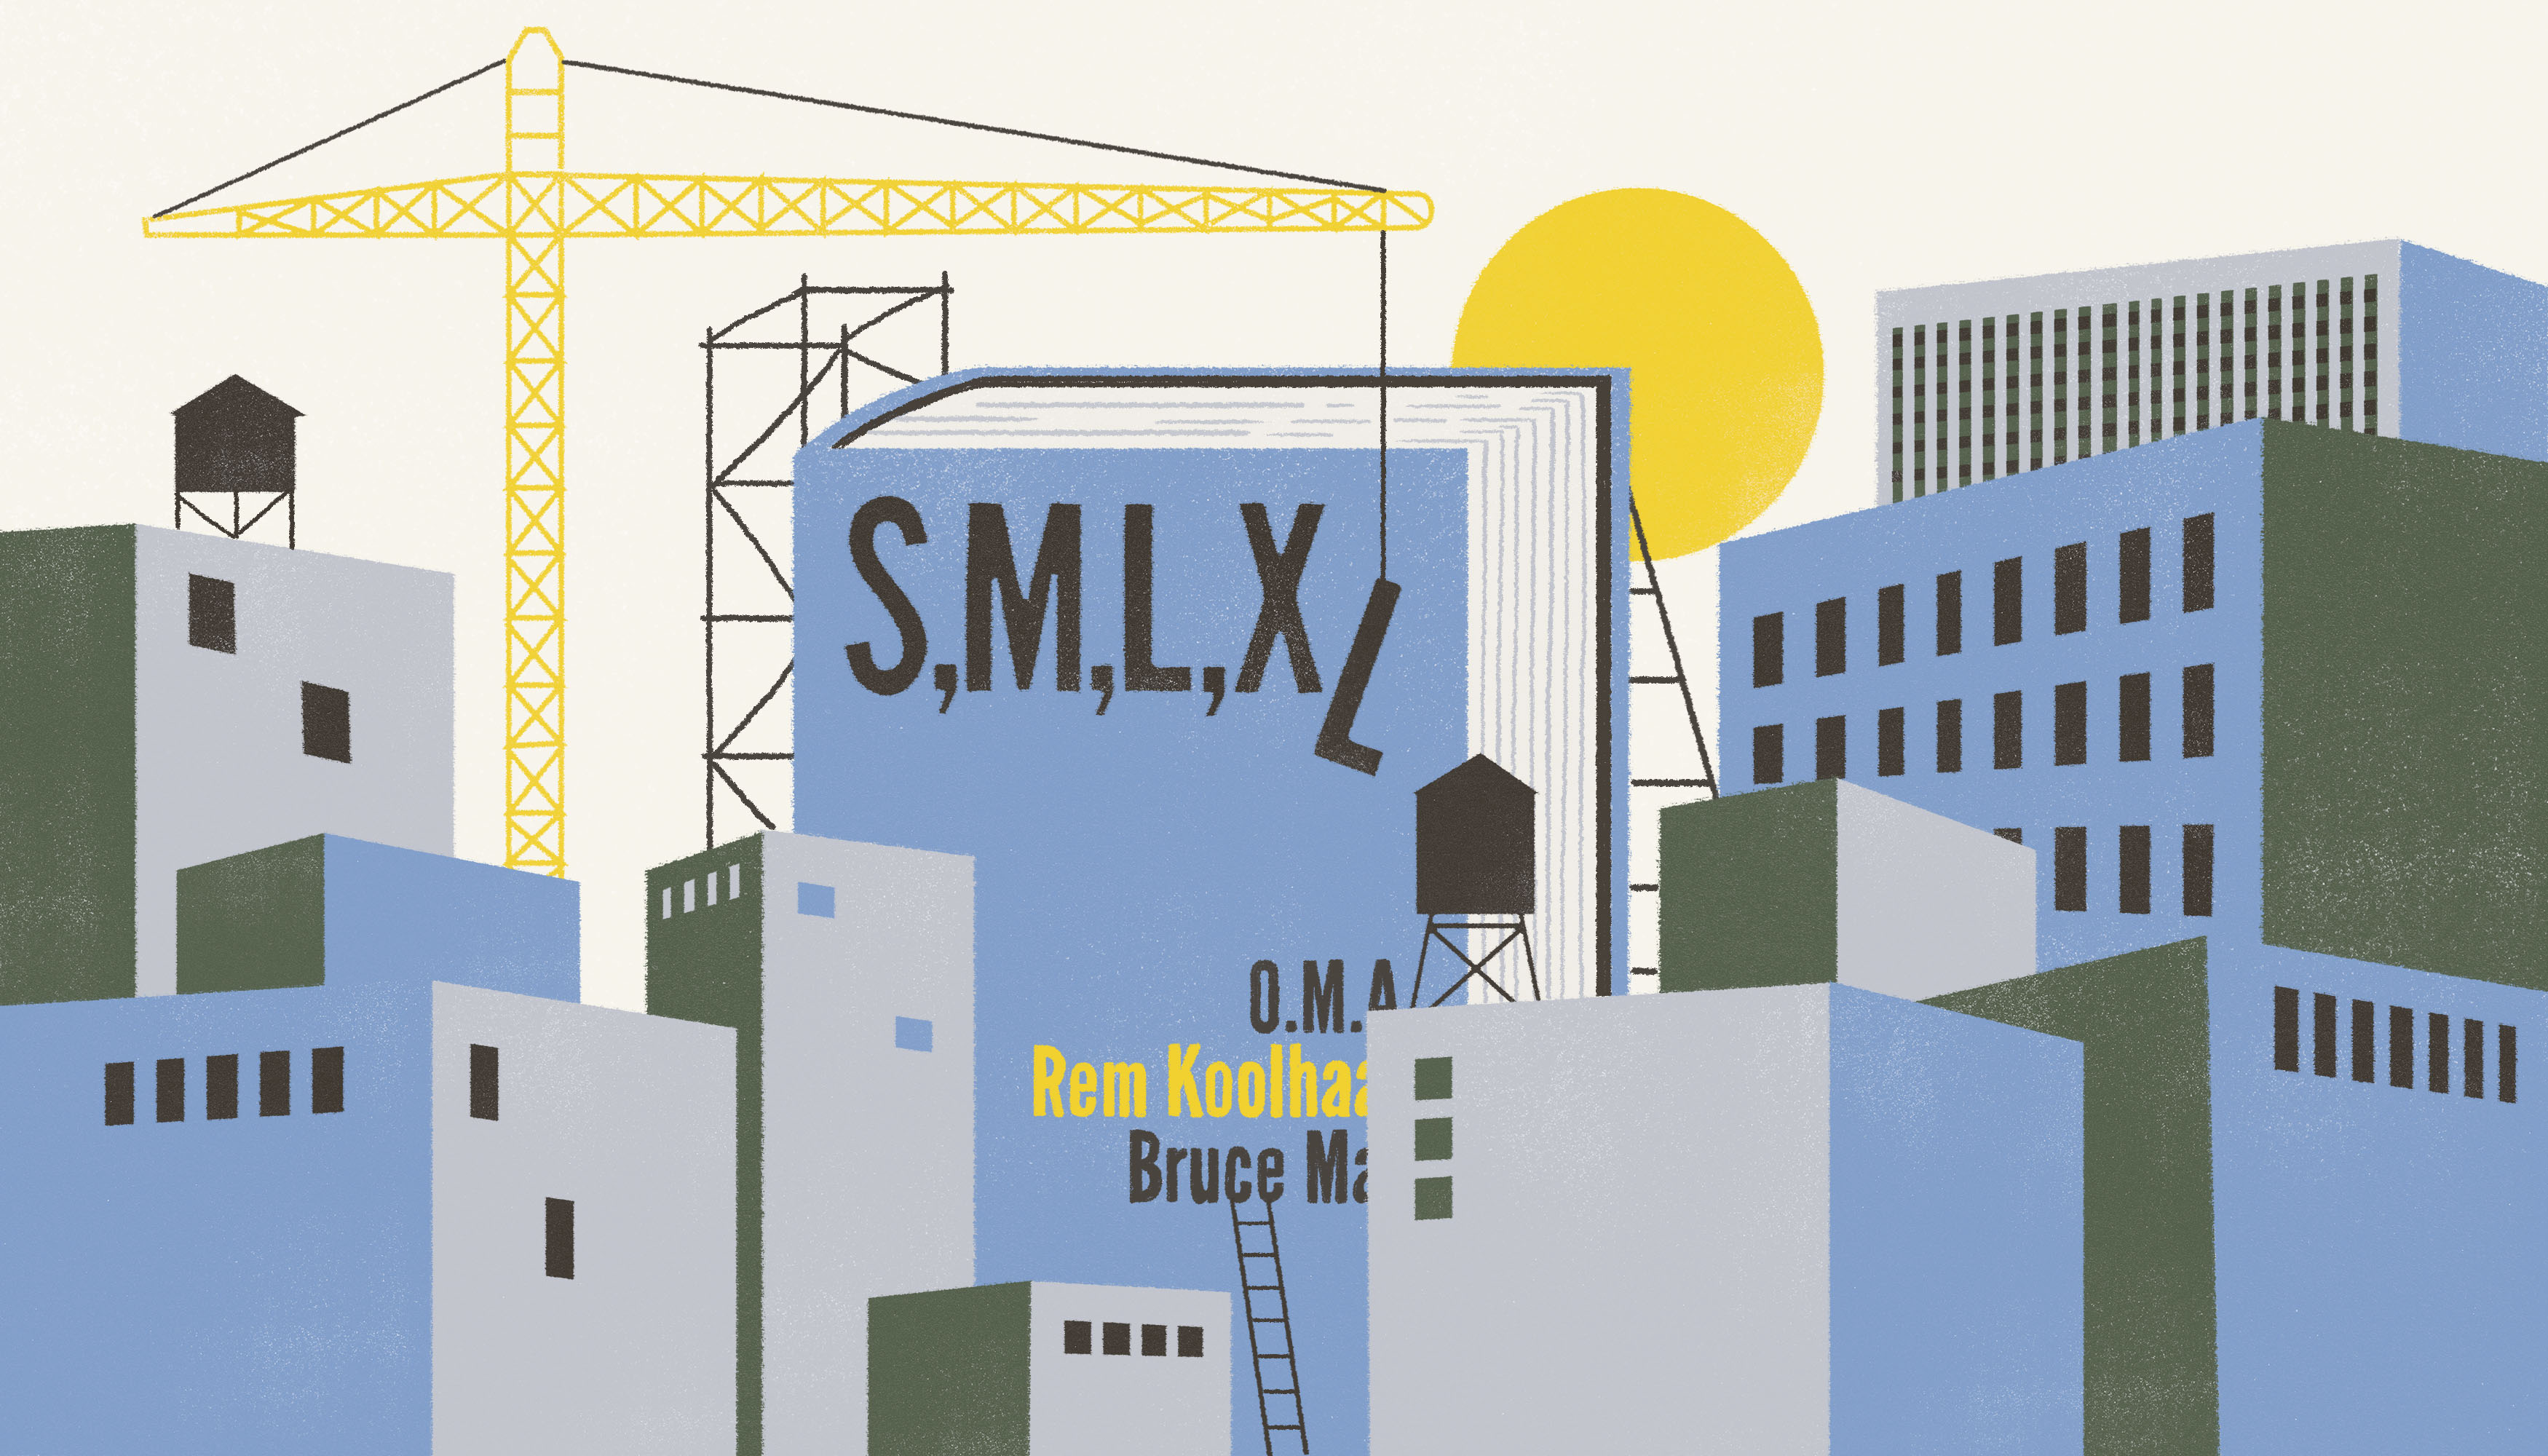 A city scene of flat blue graphic buildings being erected by a crane. The central building is a book  cover with the title ‘S,M,L,XL’. Illustration.